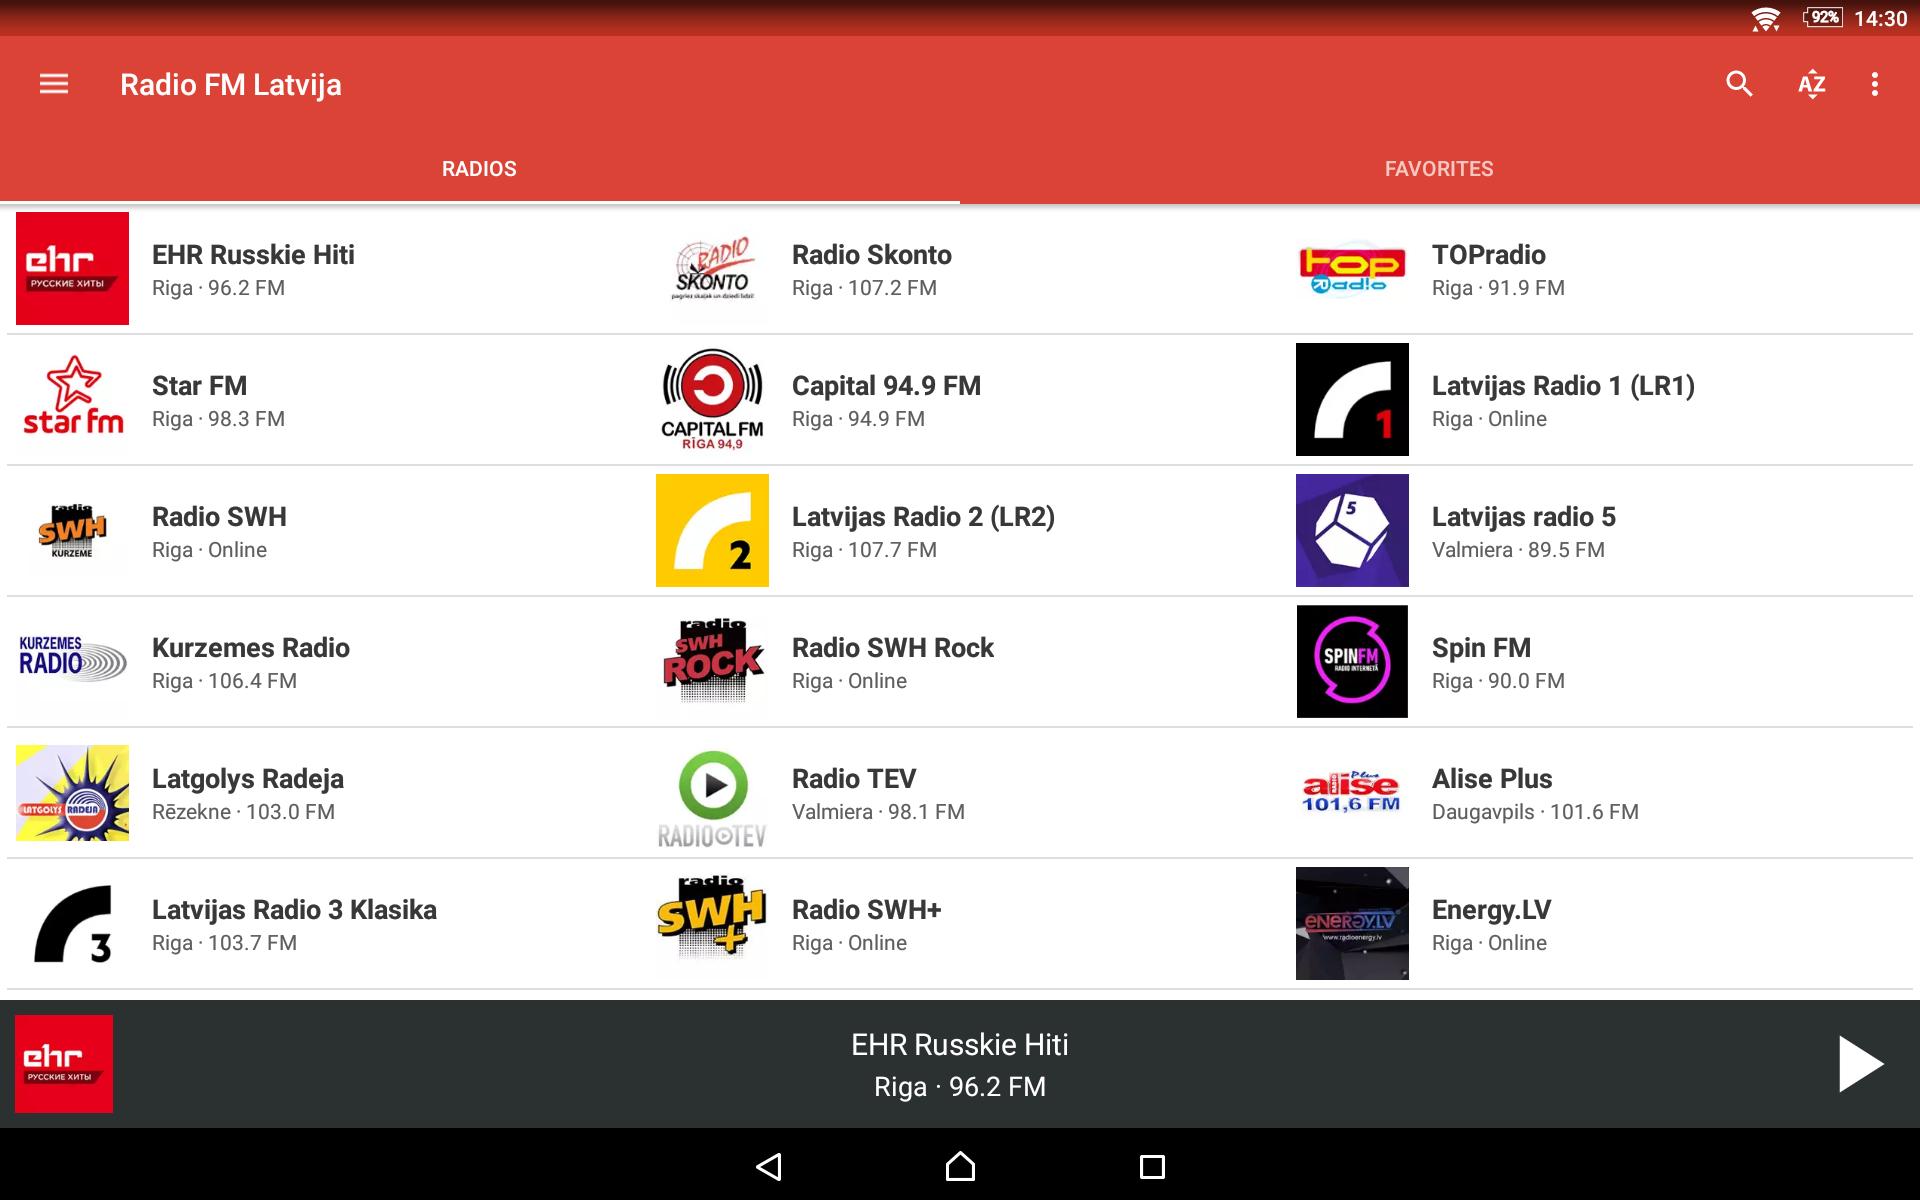 Radio FM Latvia for Android - APK Download